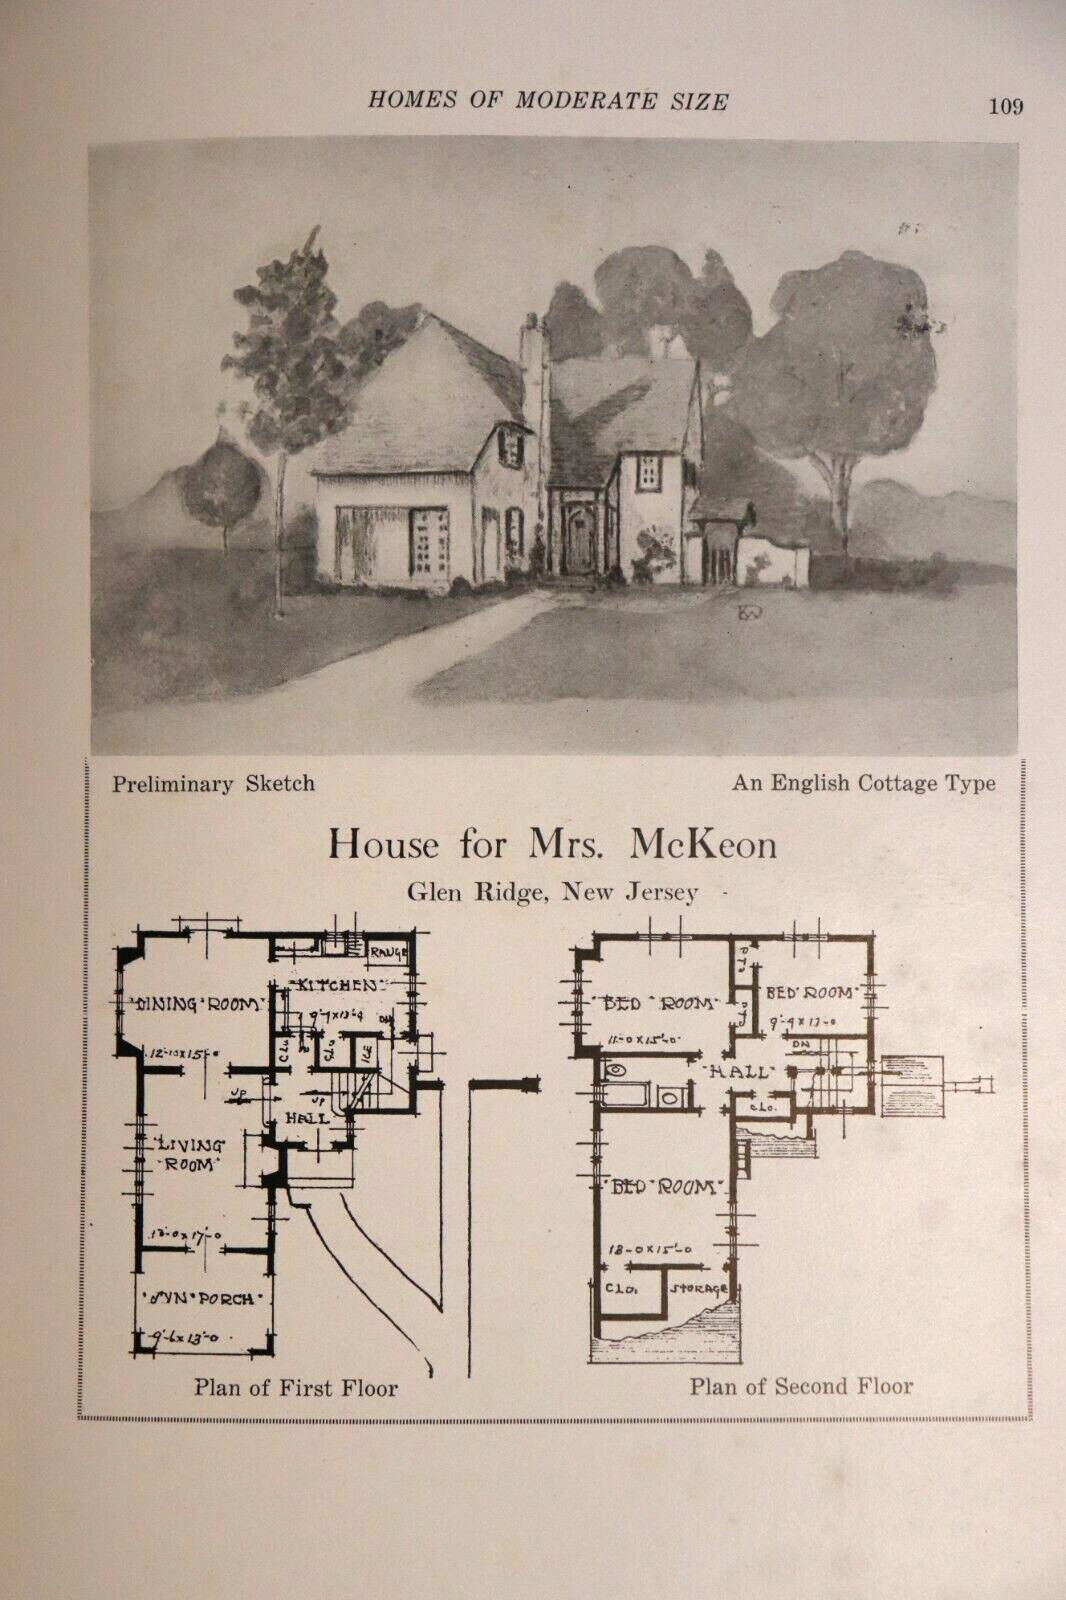 1921 Dalzell's Homes Of Moderate Size 1st Edition Architecture Book - 0